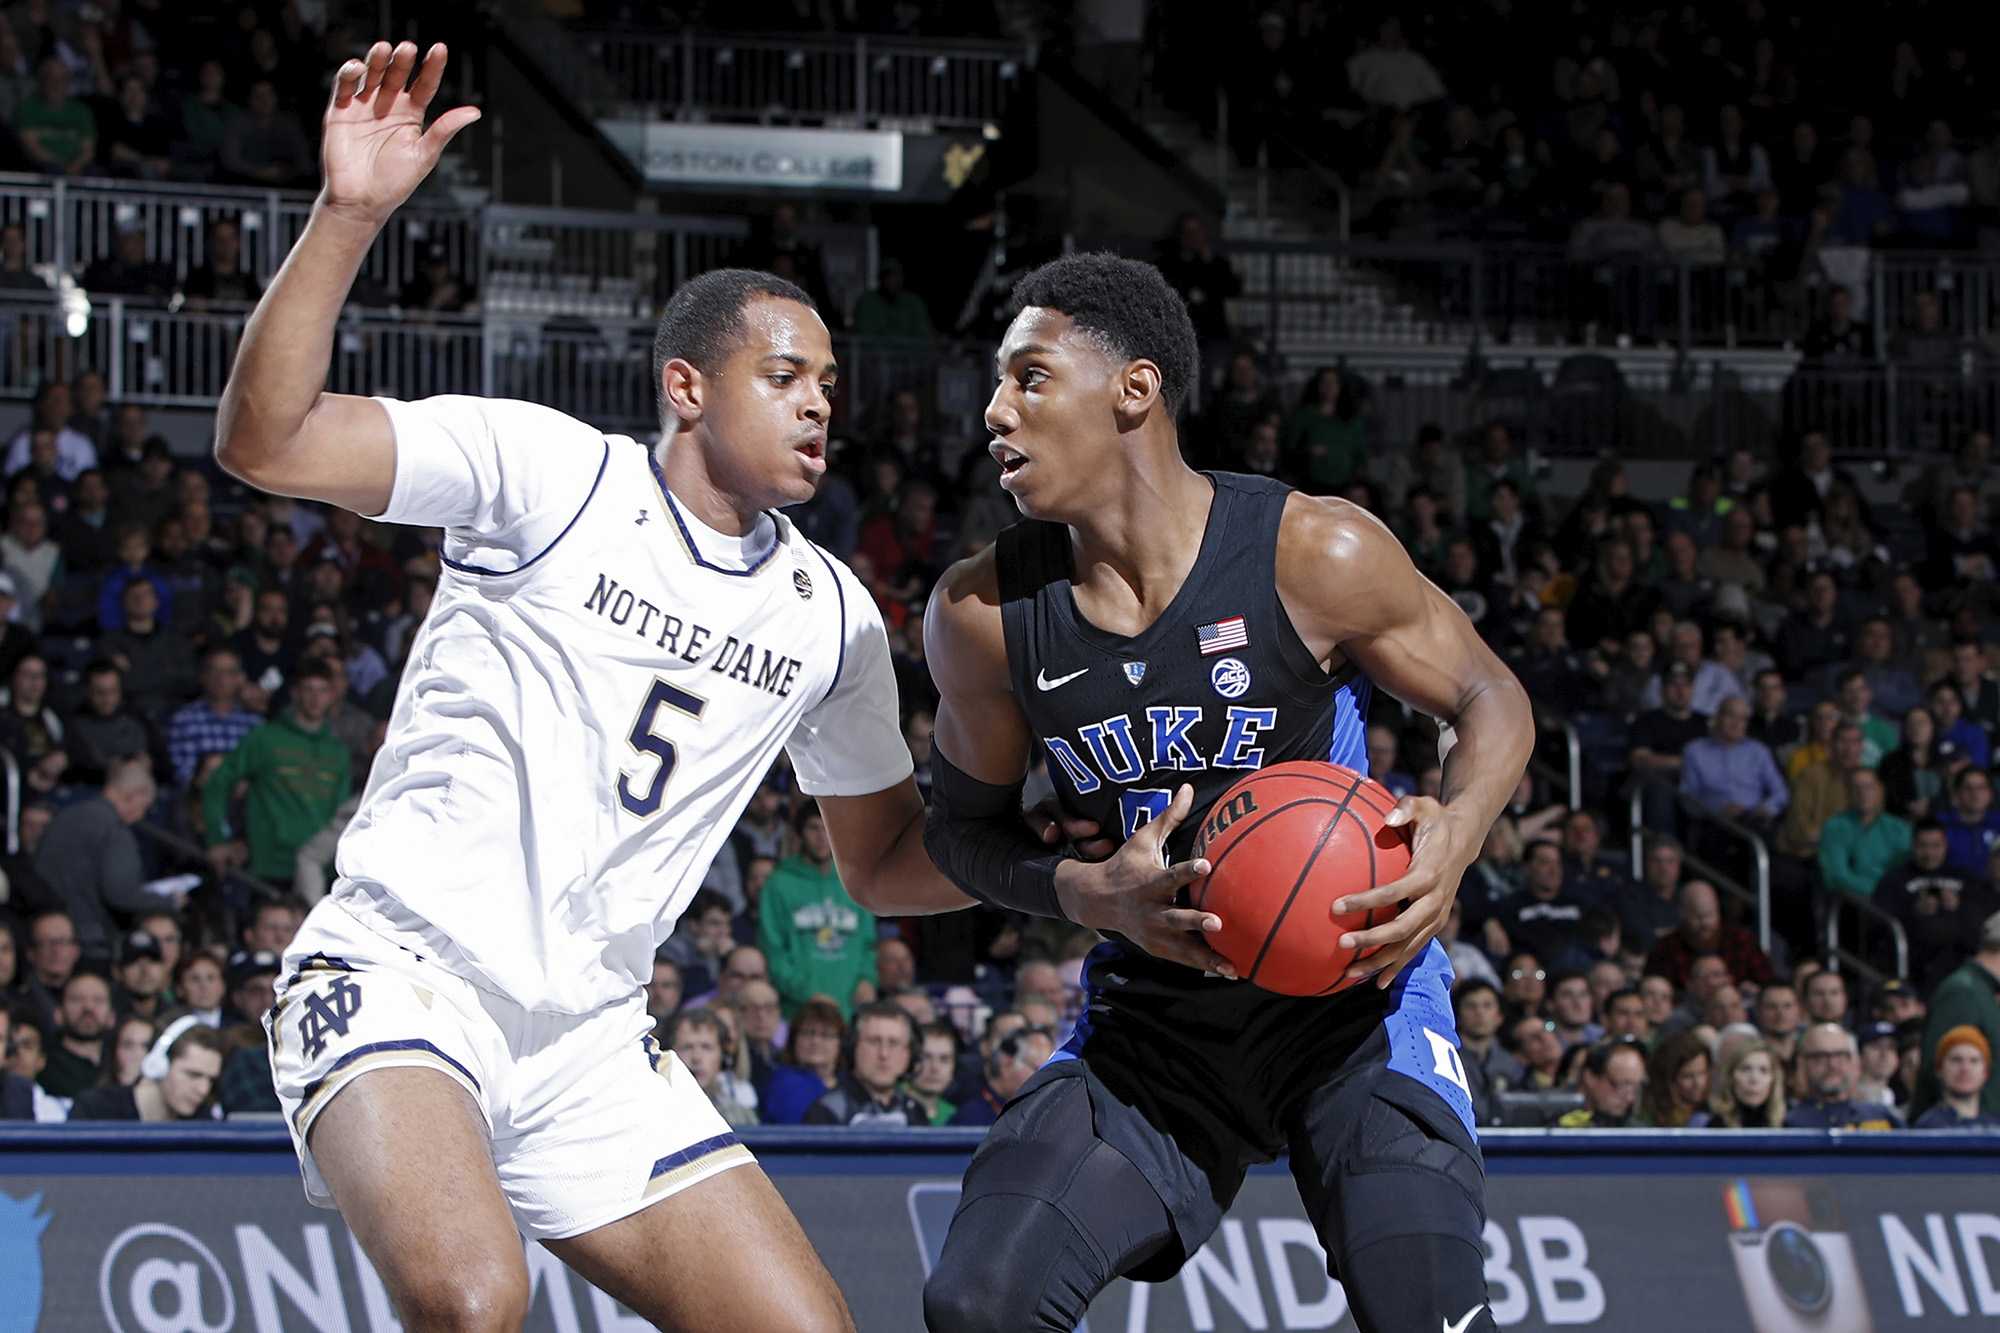 RJ Barrett #5 of the Duke Blue Devils goes to the basket against D.J. Harvey #5 of the Notre Dame Fighting Irish in the second half of the game at Purcell Pavilion on Jan. 28, 2019 in South Bend, Ind. Duke won 83-61. (Joe Robbins/Getty Images/TNS)